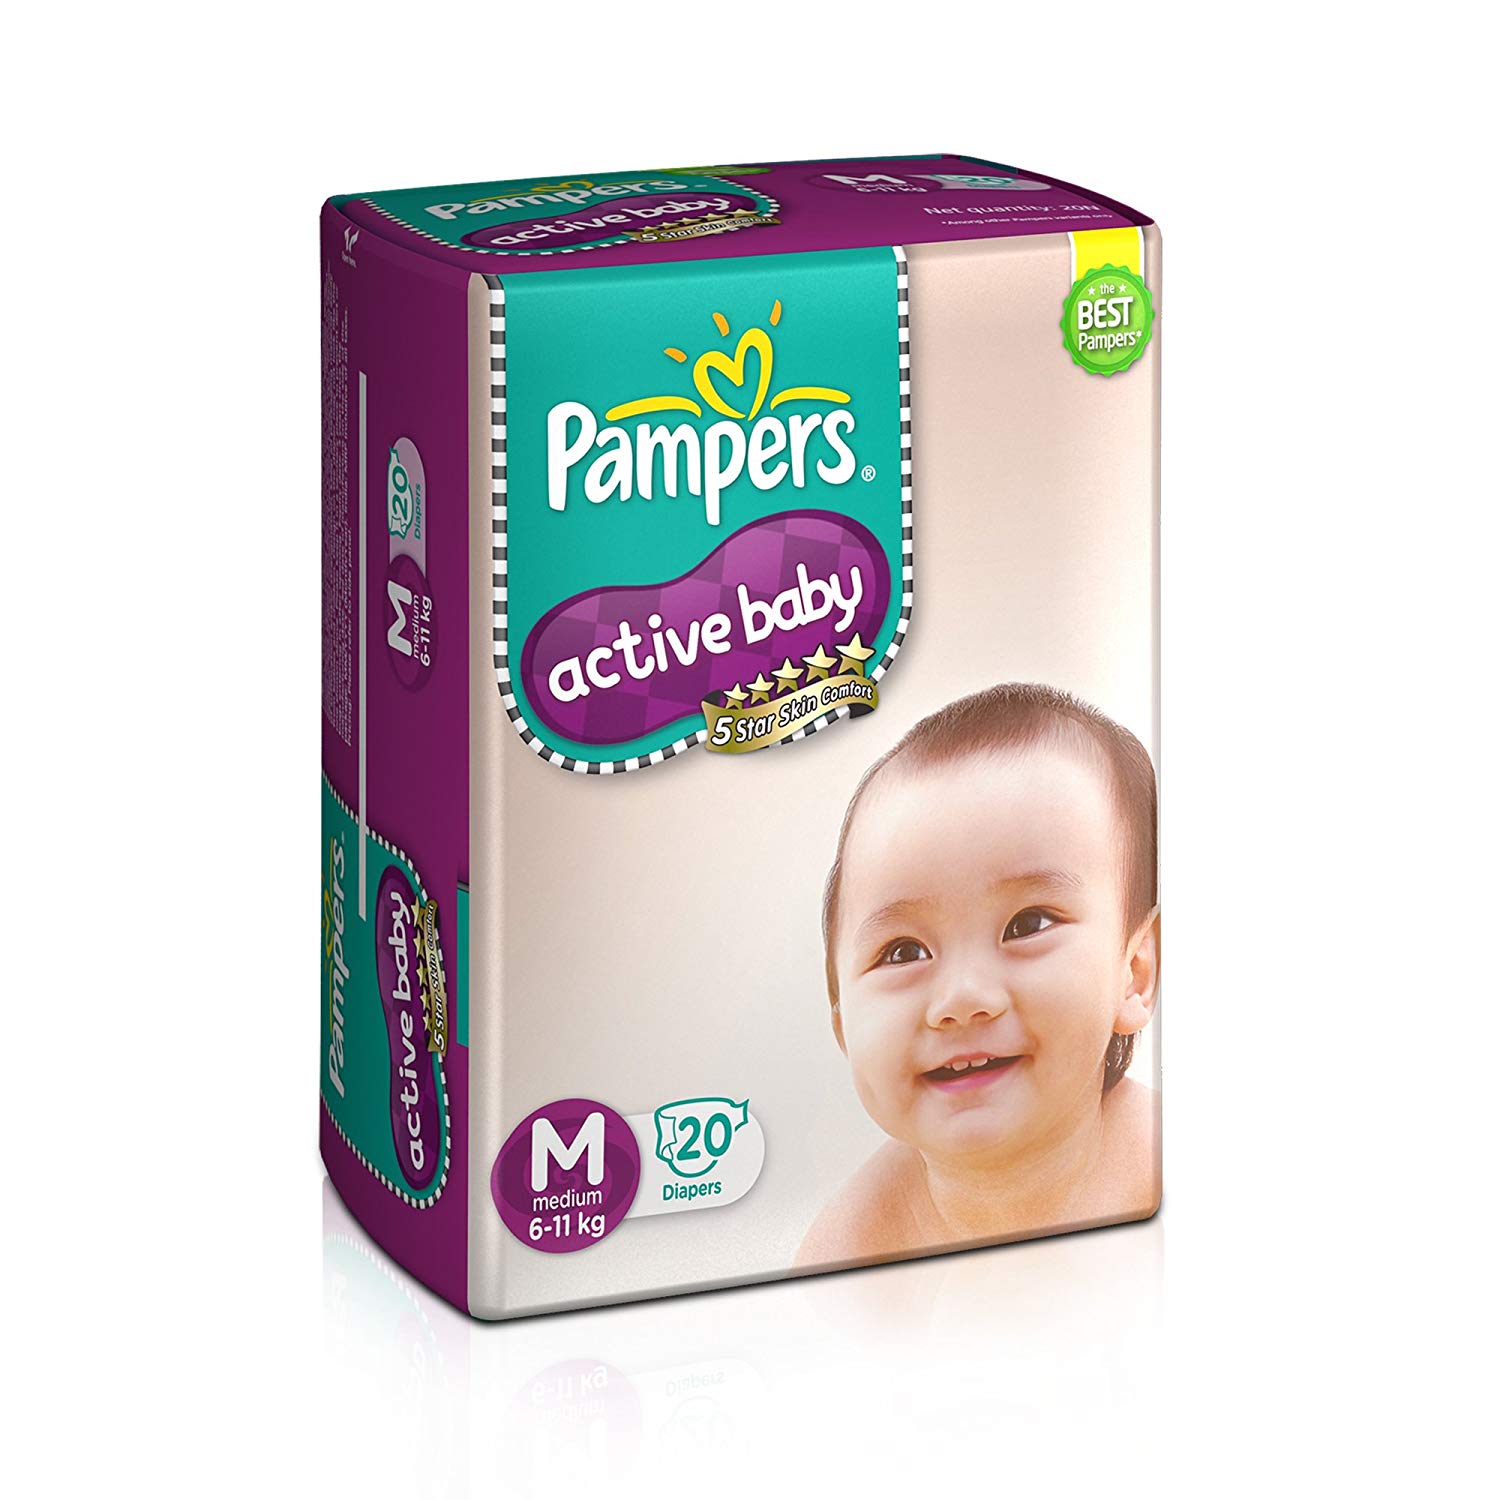 price-list-india-pampers-active-baby-medium-size-diapers-20-count